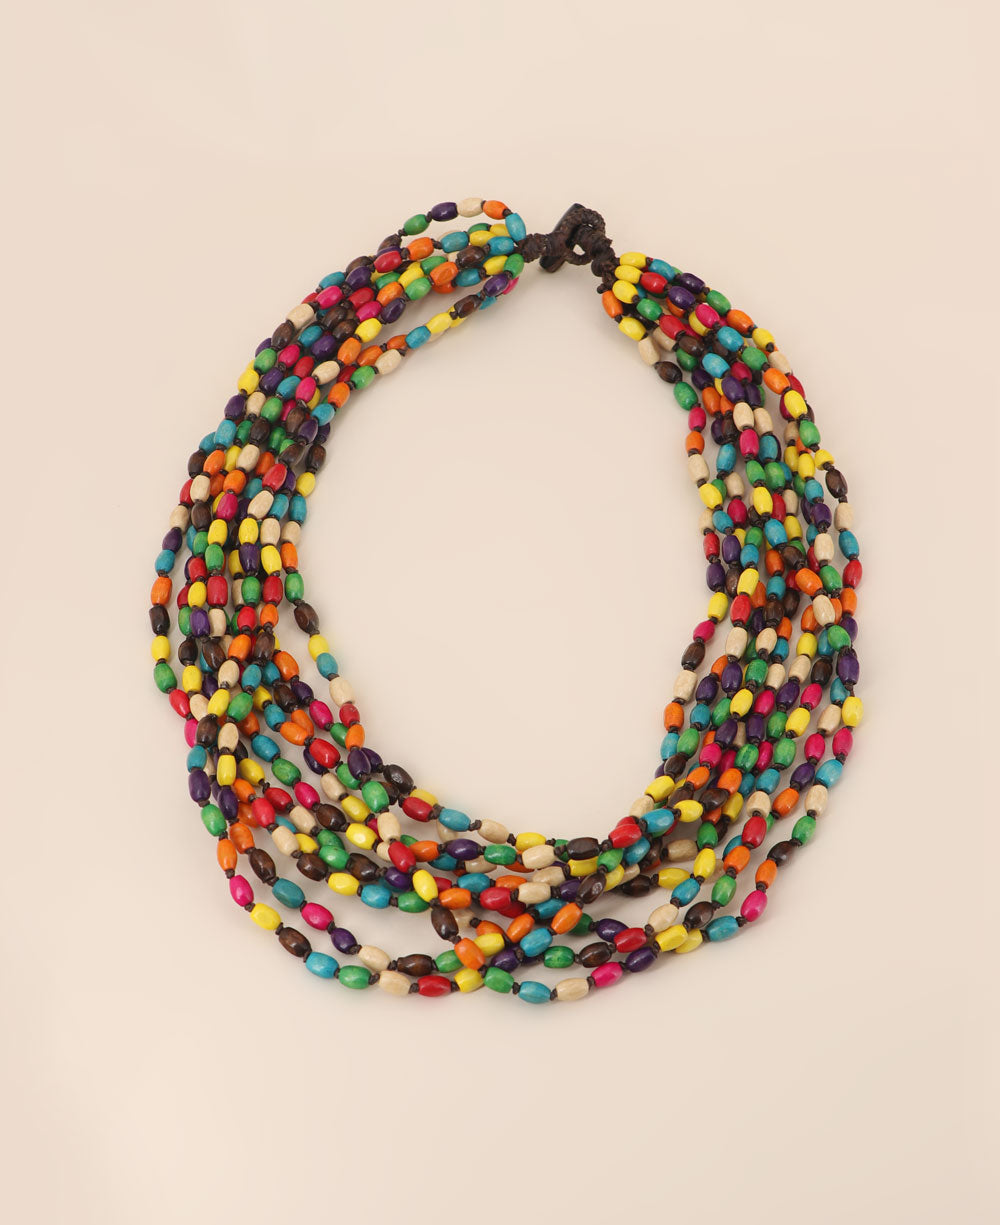 Colorful Boxwood beaded necklace made of 10 strands of colorful rice shaped carved beads